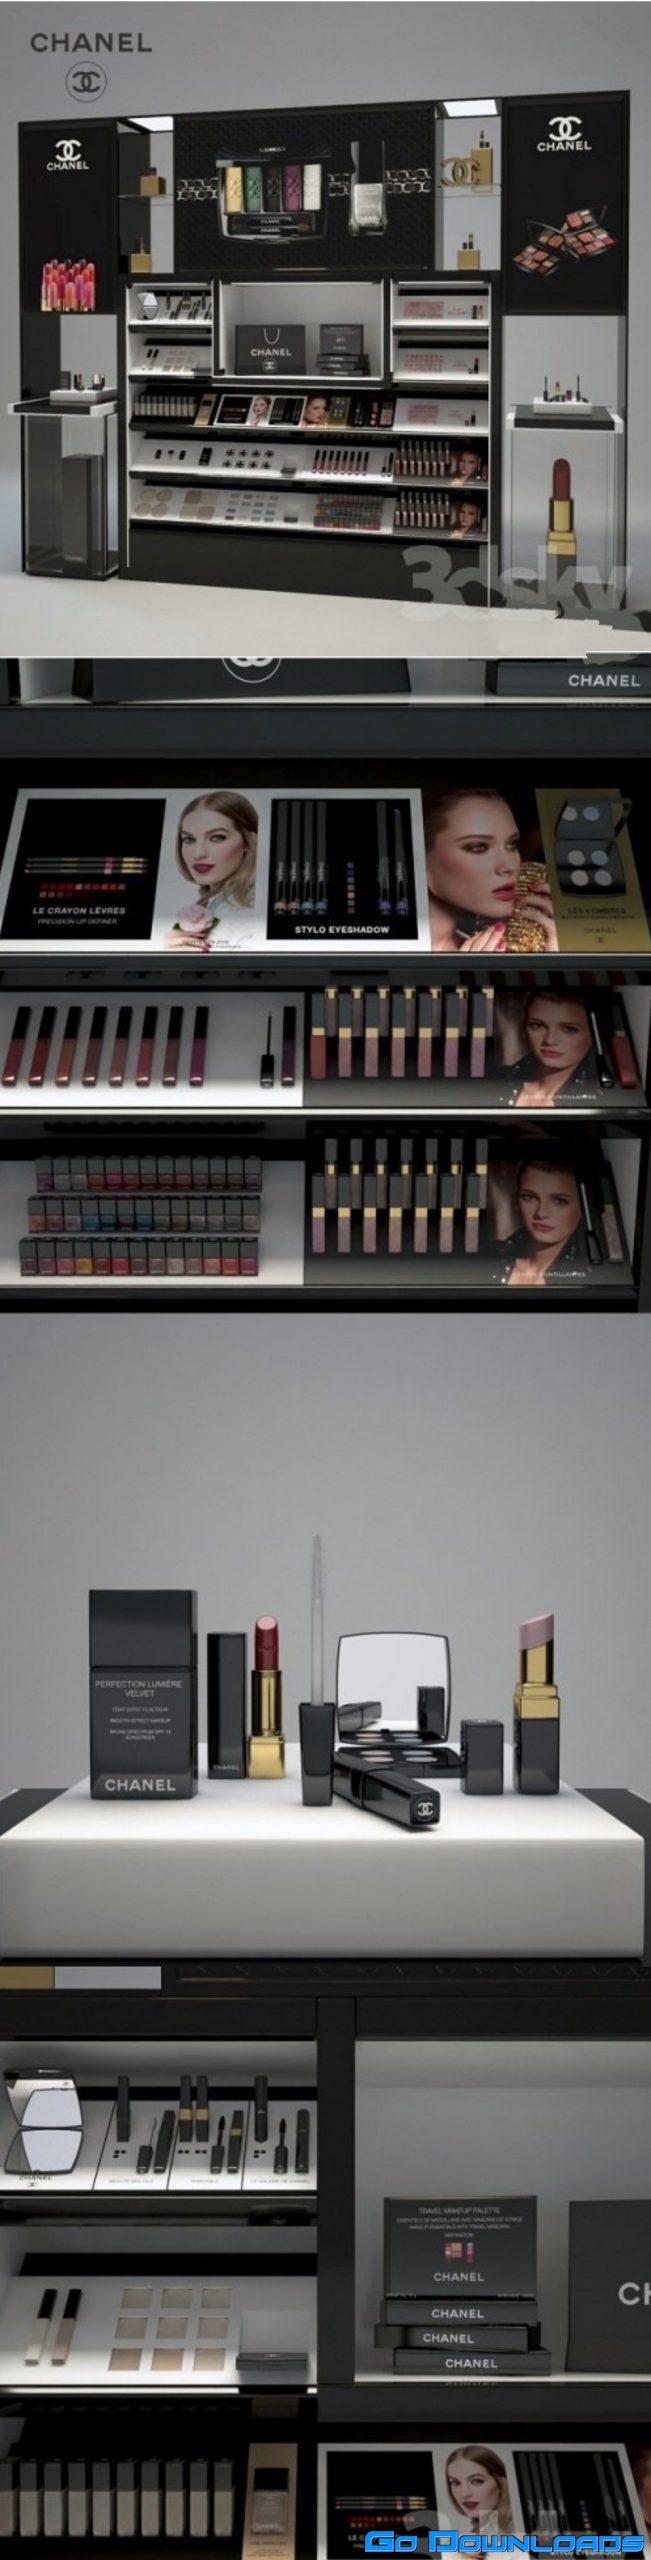 Chanel Cosmetics Display 3D Model Free Download